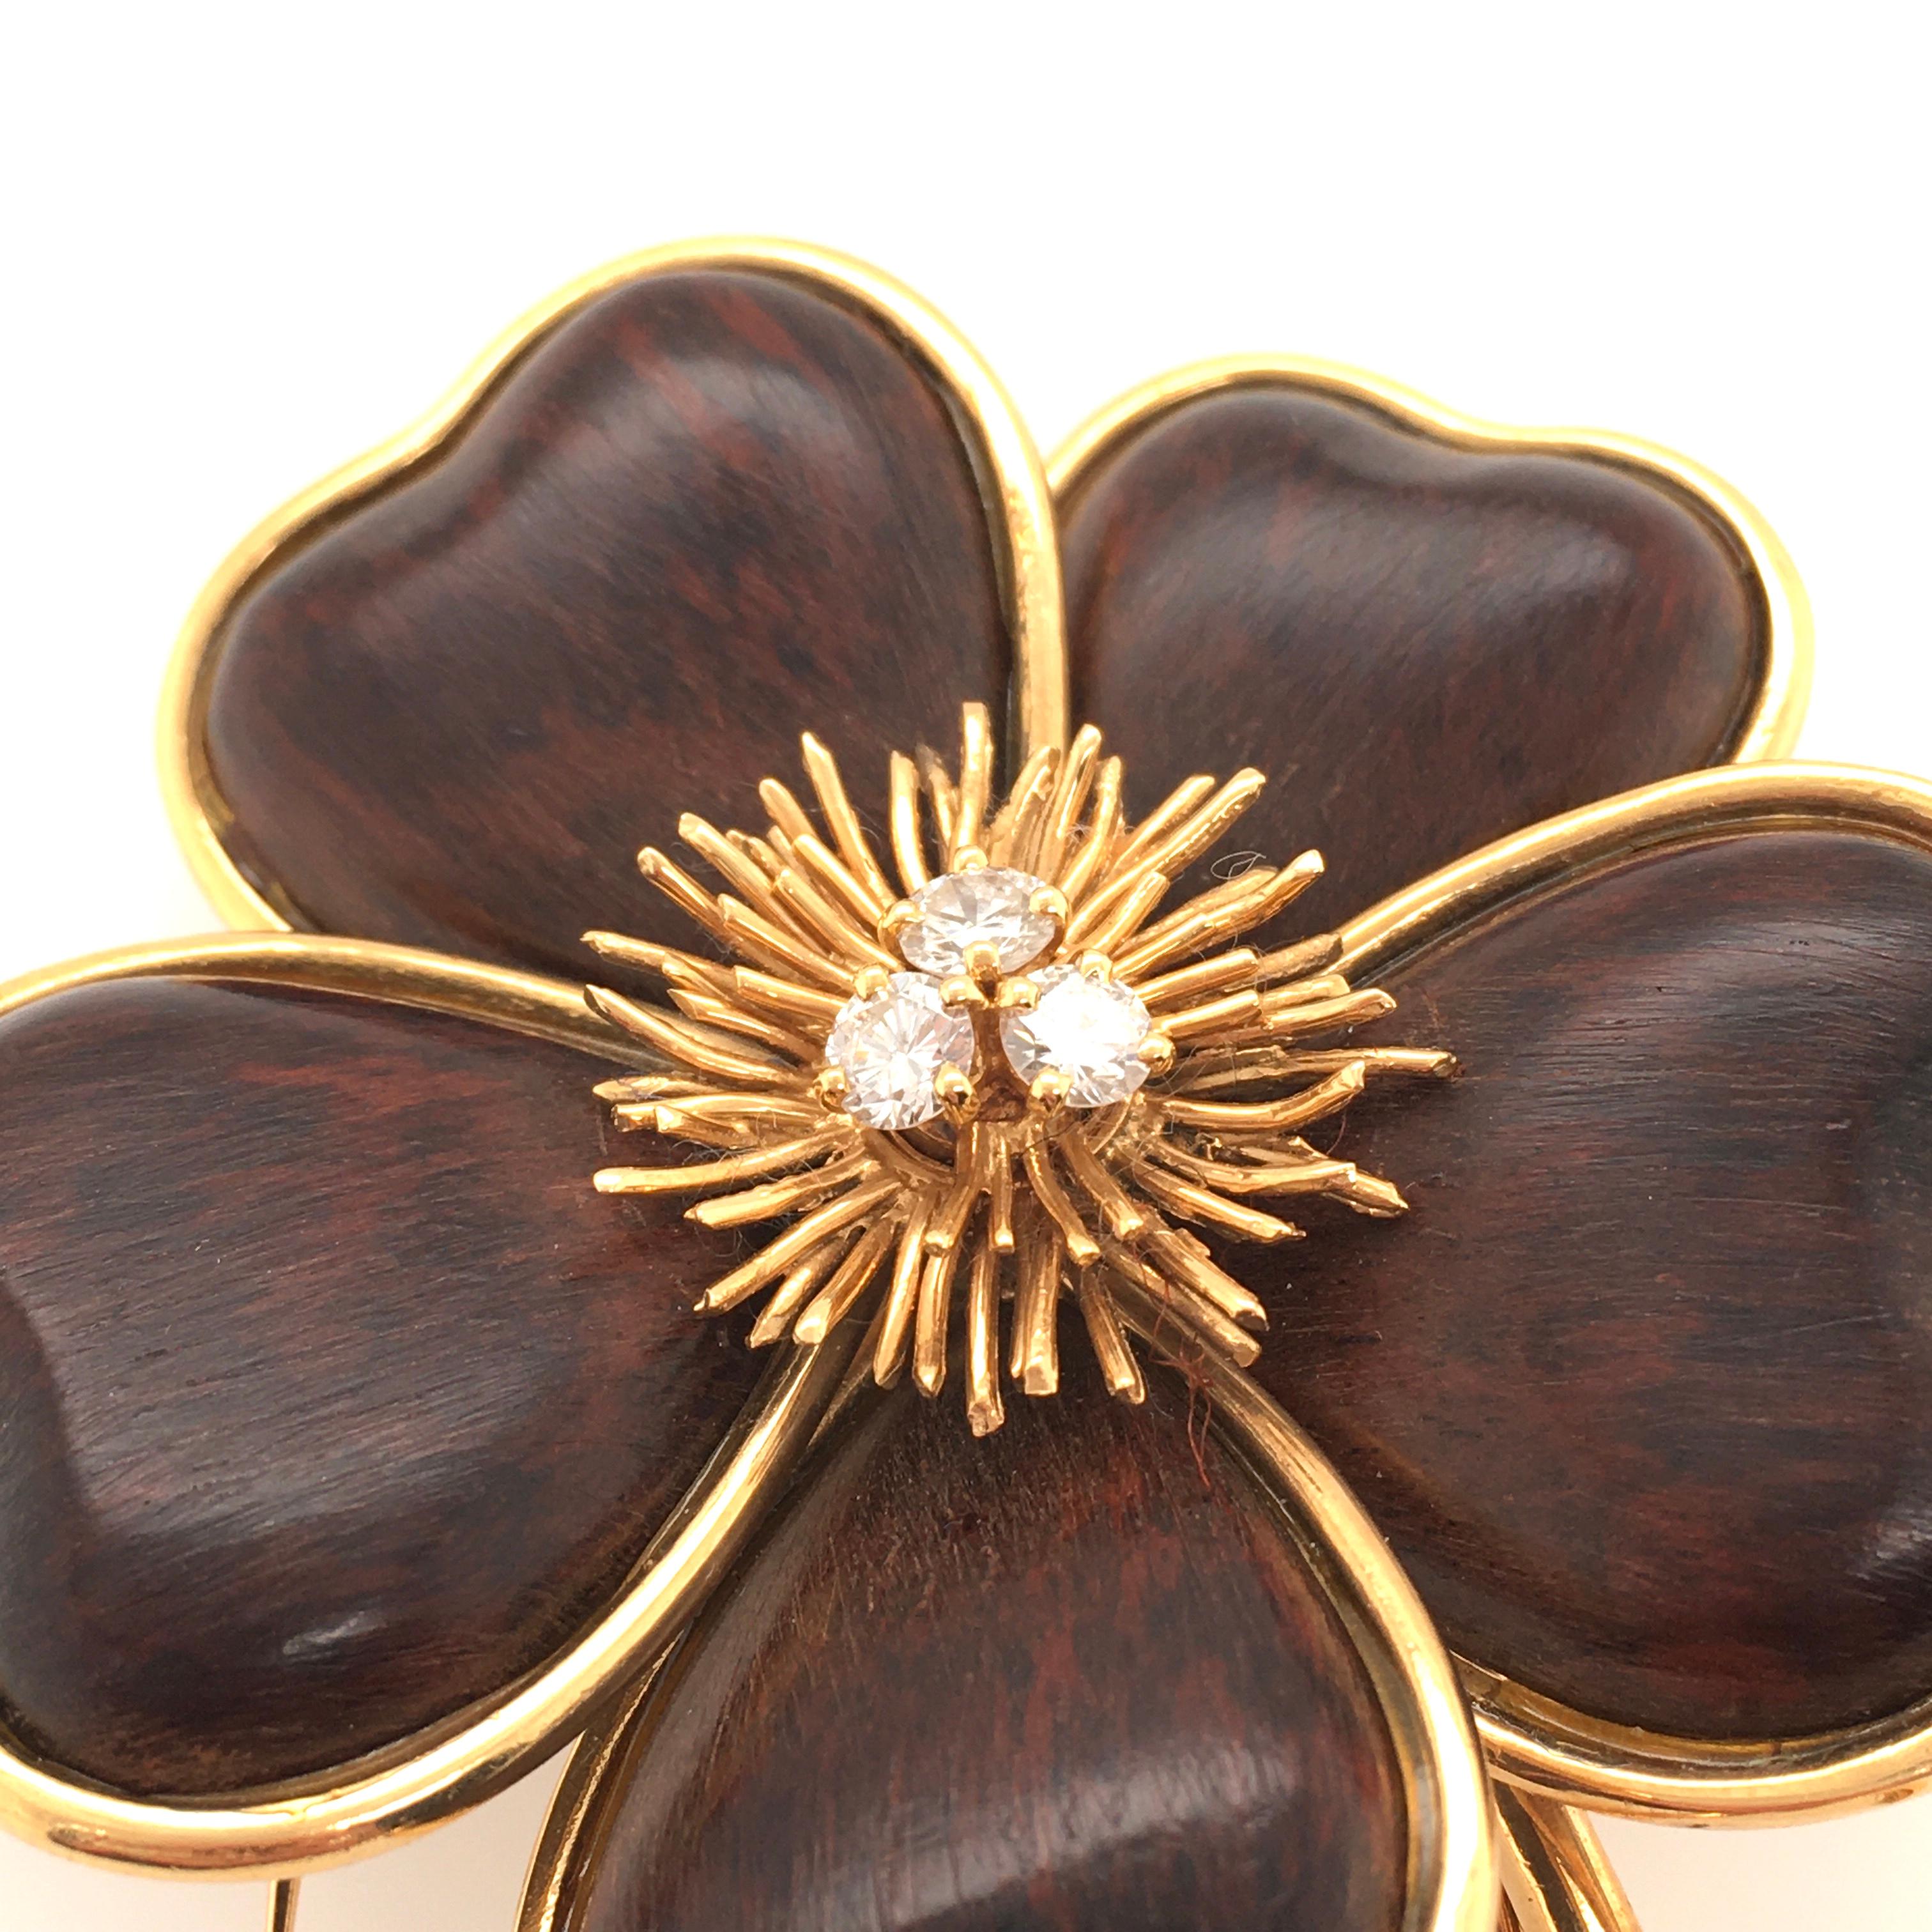 An 18 karat yellow gold, wood and diamond Nerval brooch. Van Cleef & Arpels. Designed as a sculpted 18k gold flower with wooden petals, extending polished gold stem and textured leaf,  centering a gold spray, enhanced by three (3) circular cut